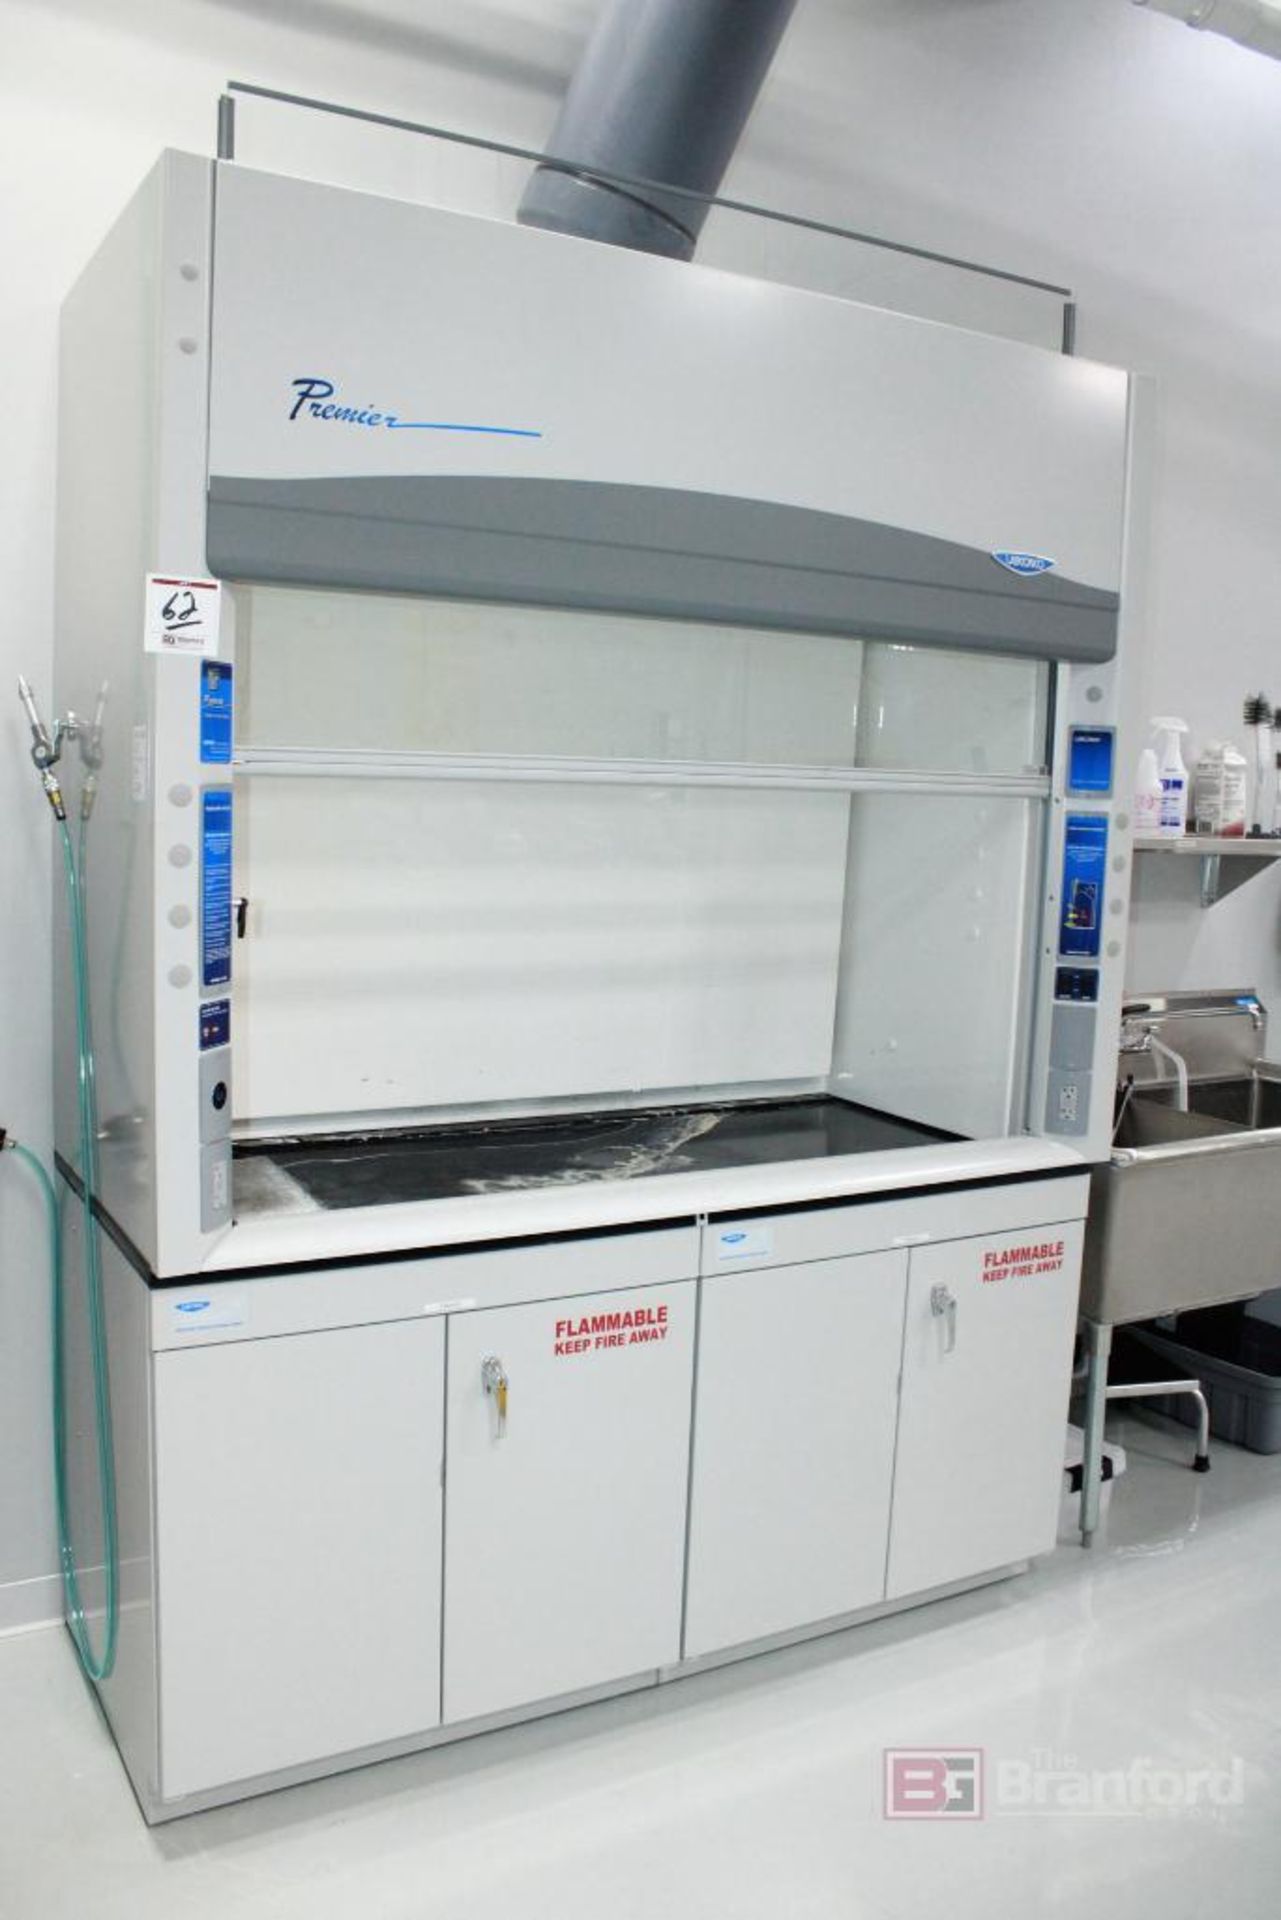 Labconco Premier Chemical Fume Hood & Flammable Cabinet Base - Image 2 of 5